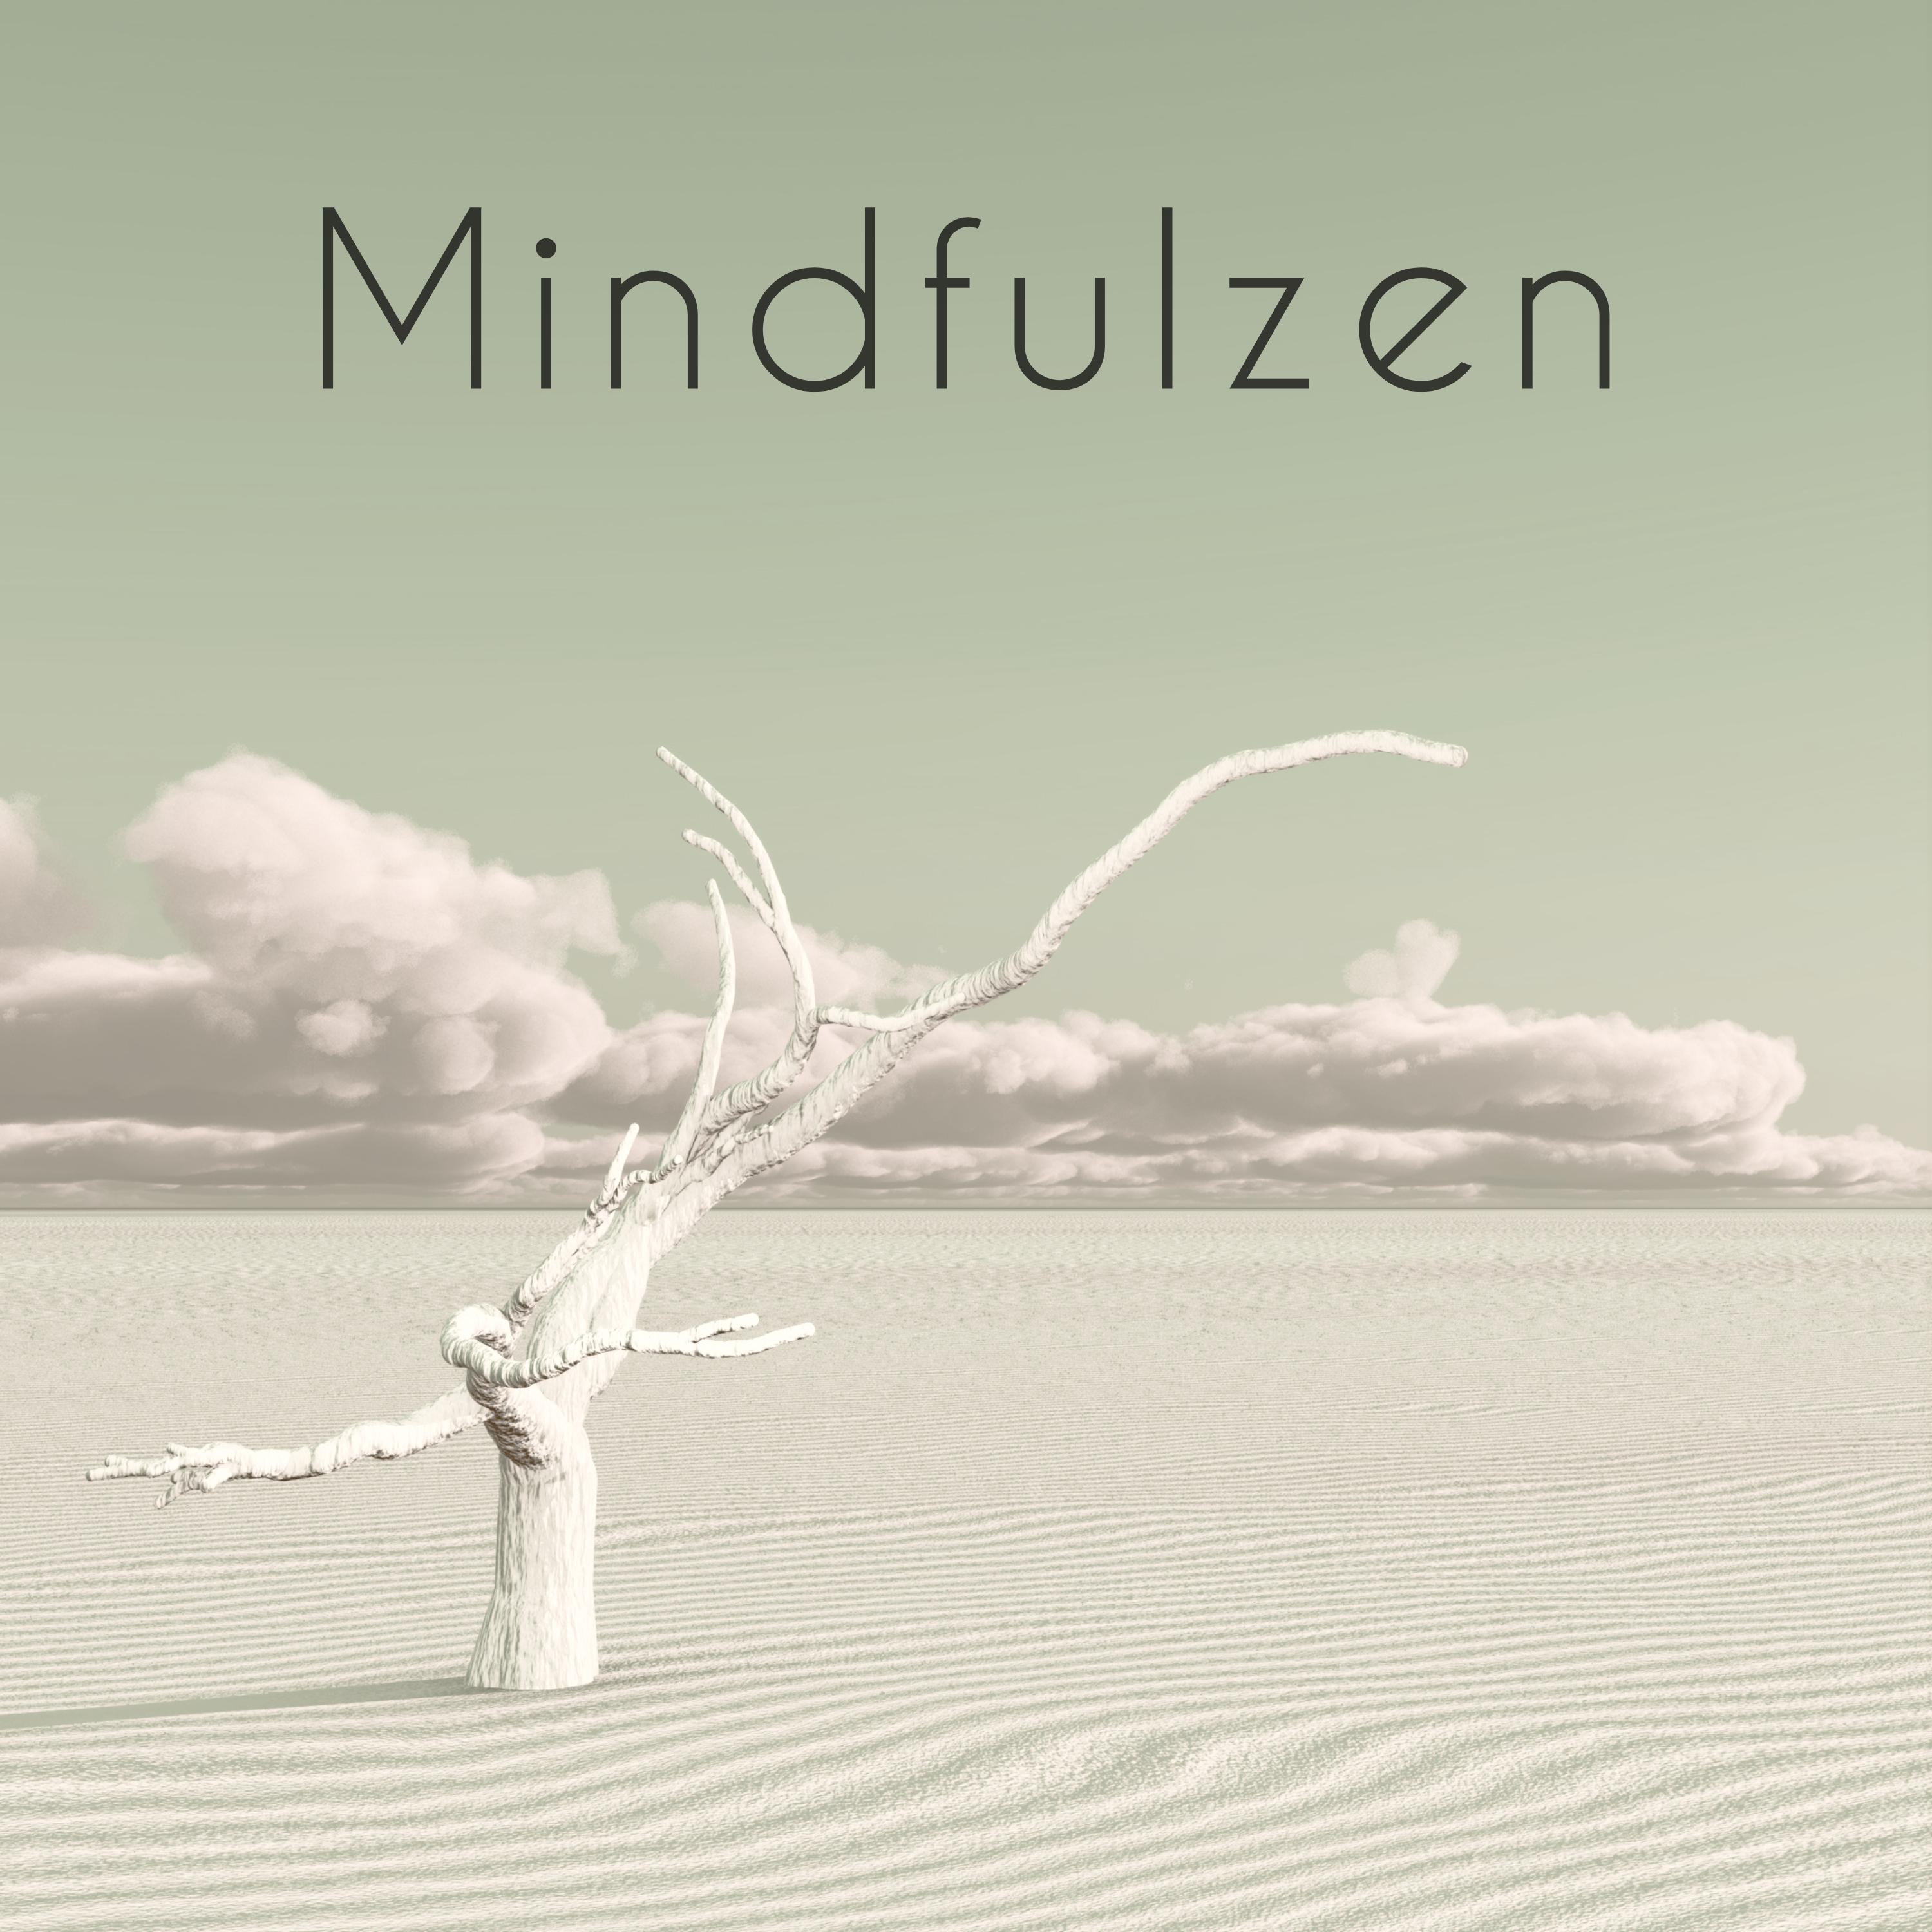 Mindfulzen  Soothing Zen Music to Find Inner Peace, Live the Present Moment, Here and Now